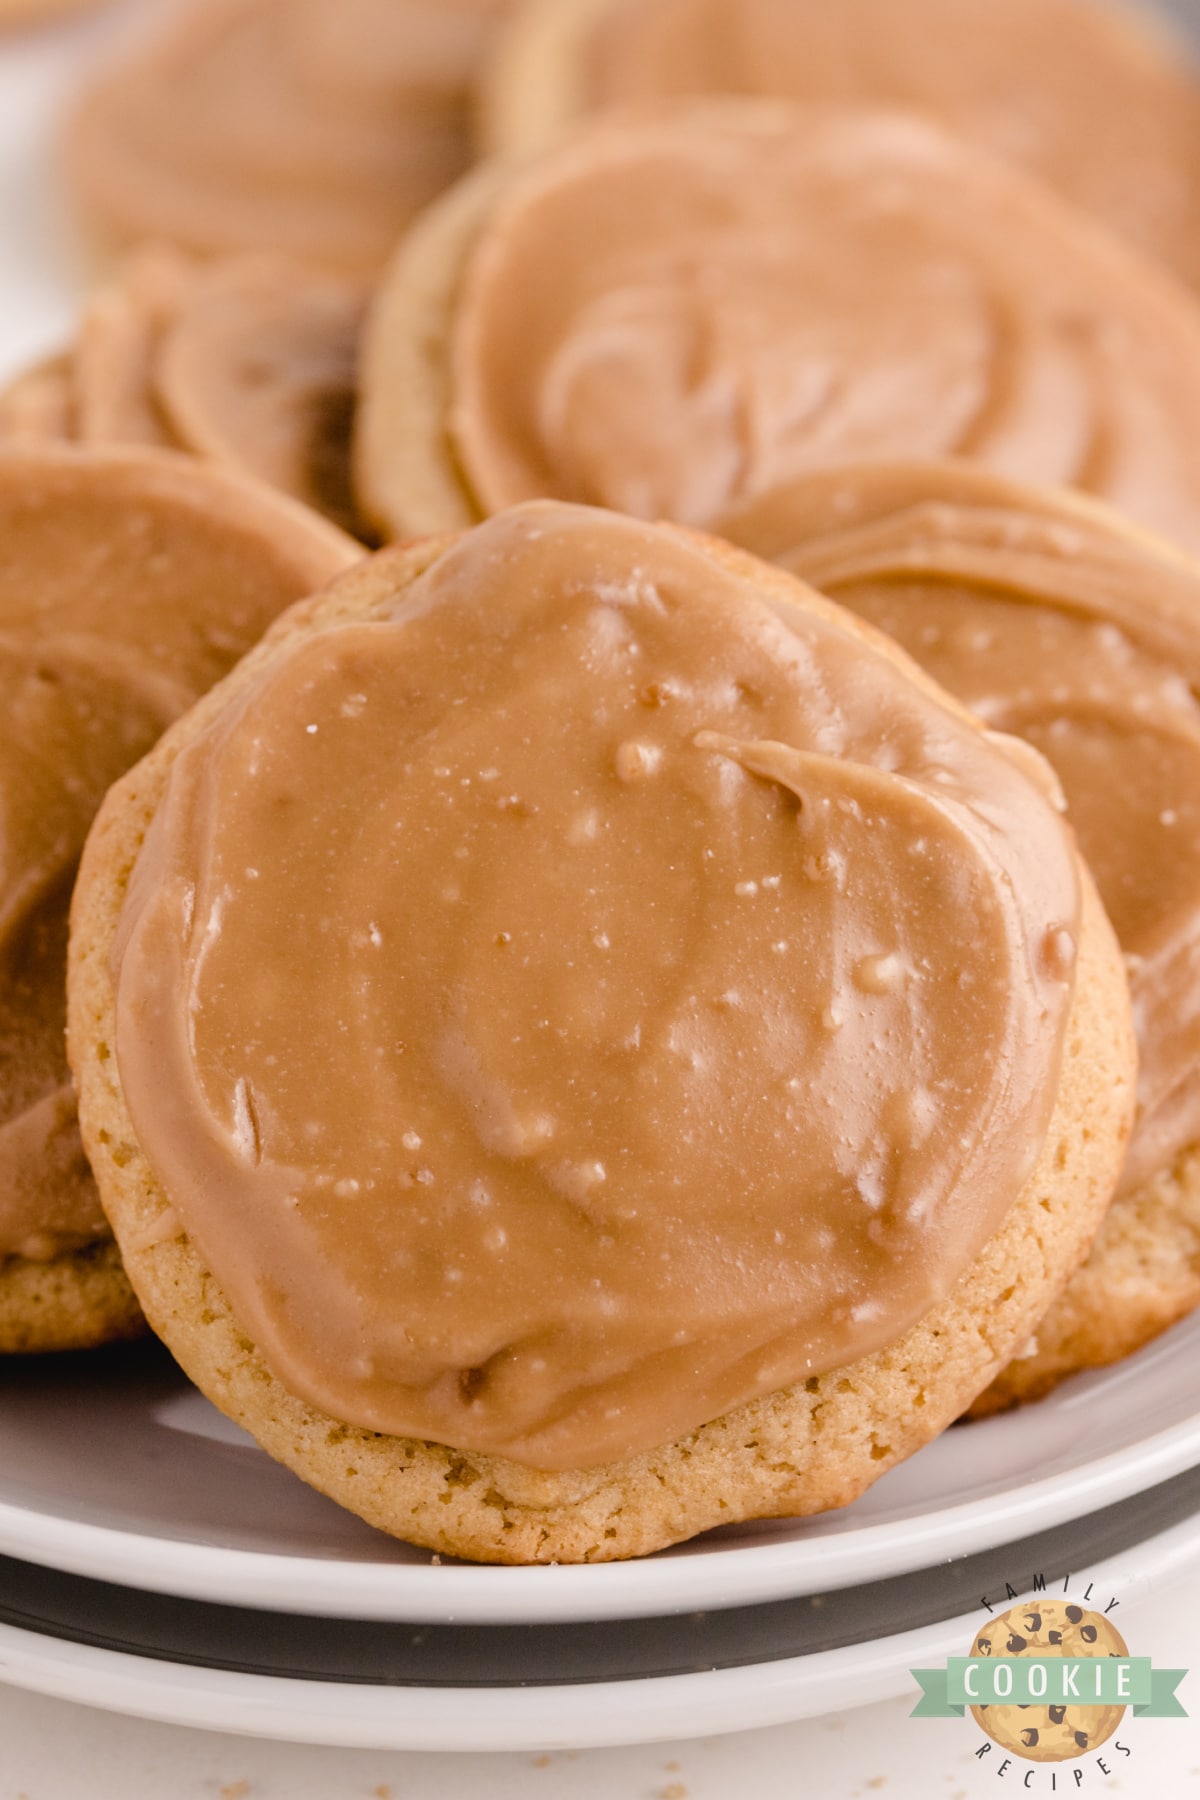 Frosted Brown Sugar Cookies are soft and chewy with a simple brown sugar frosting on top. Easy cookie recipe with a rich brown sugar flavor that is absolutely delicious! 